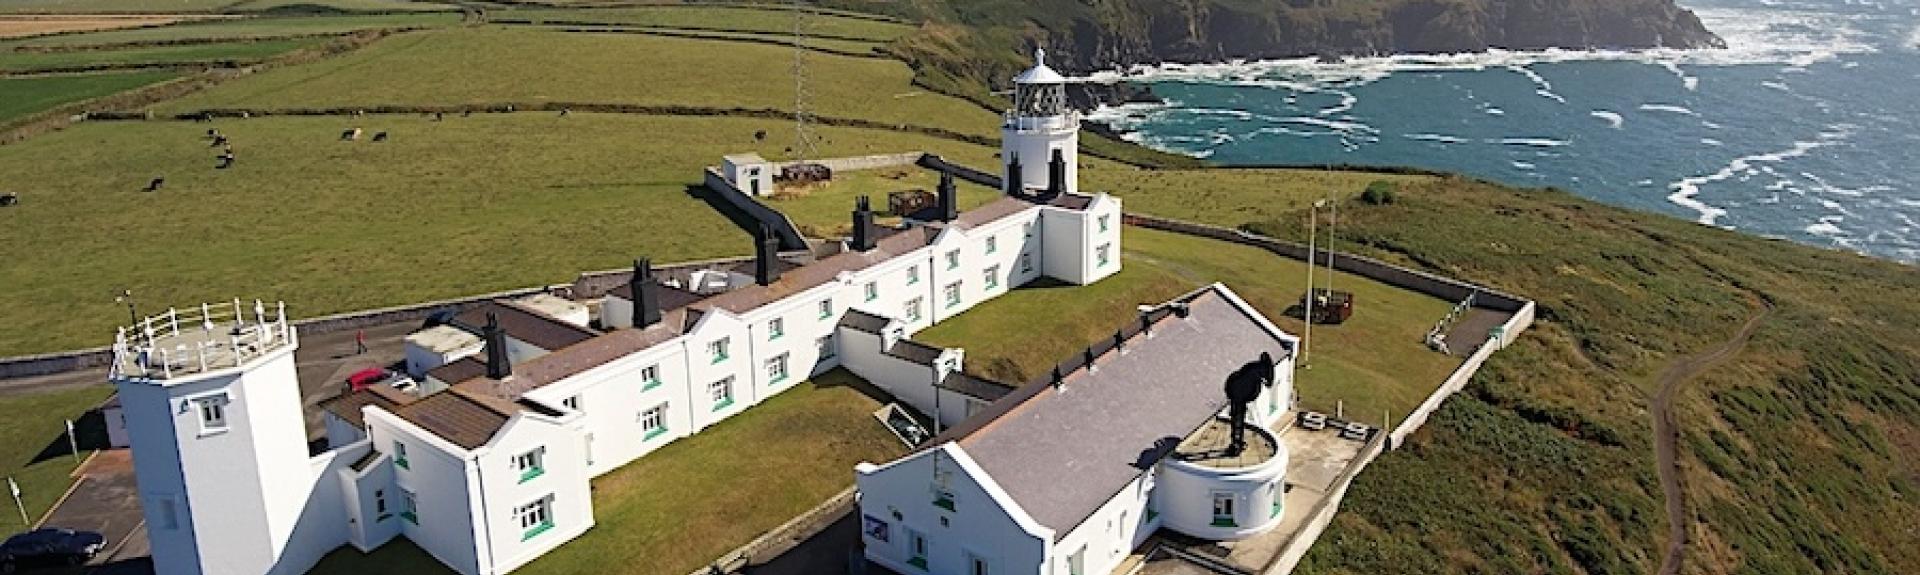 A Cornish lighthouse complex with holiday cottages in a clifftop location.